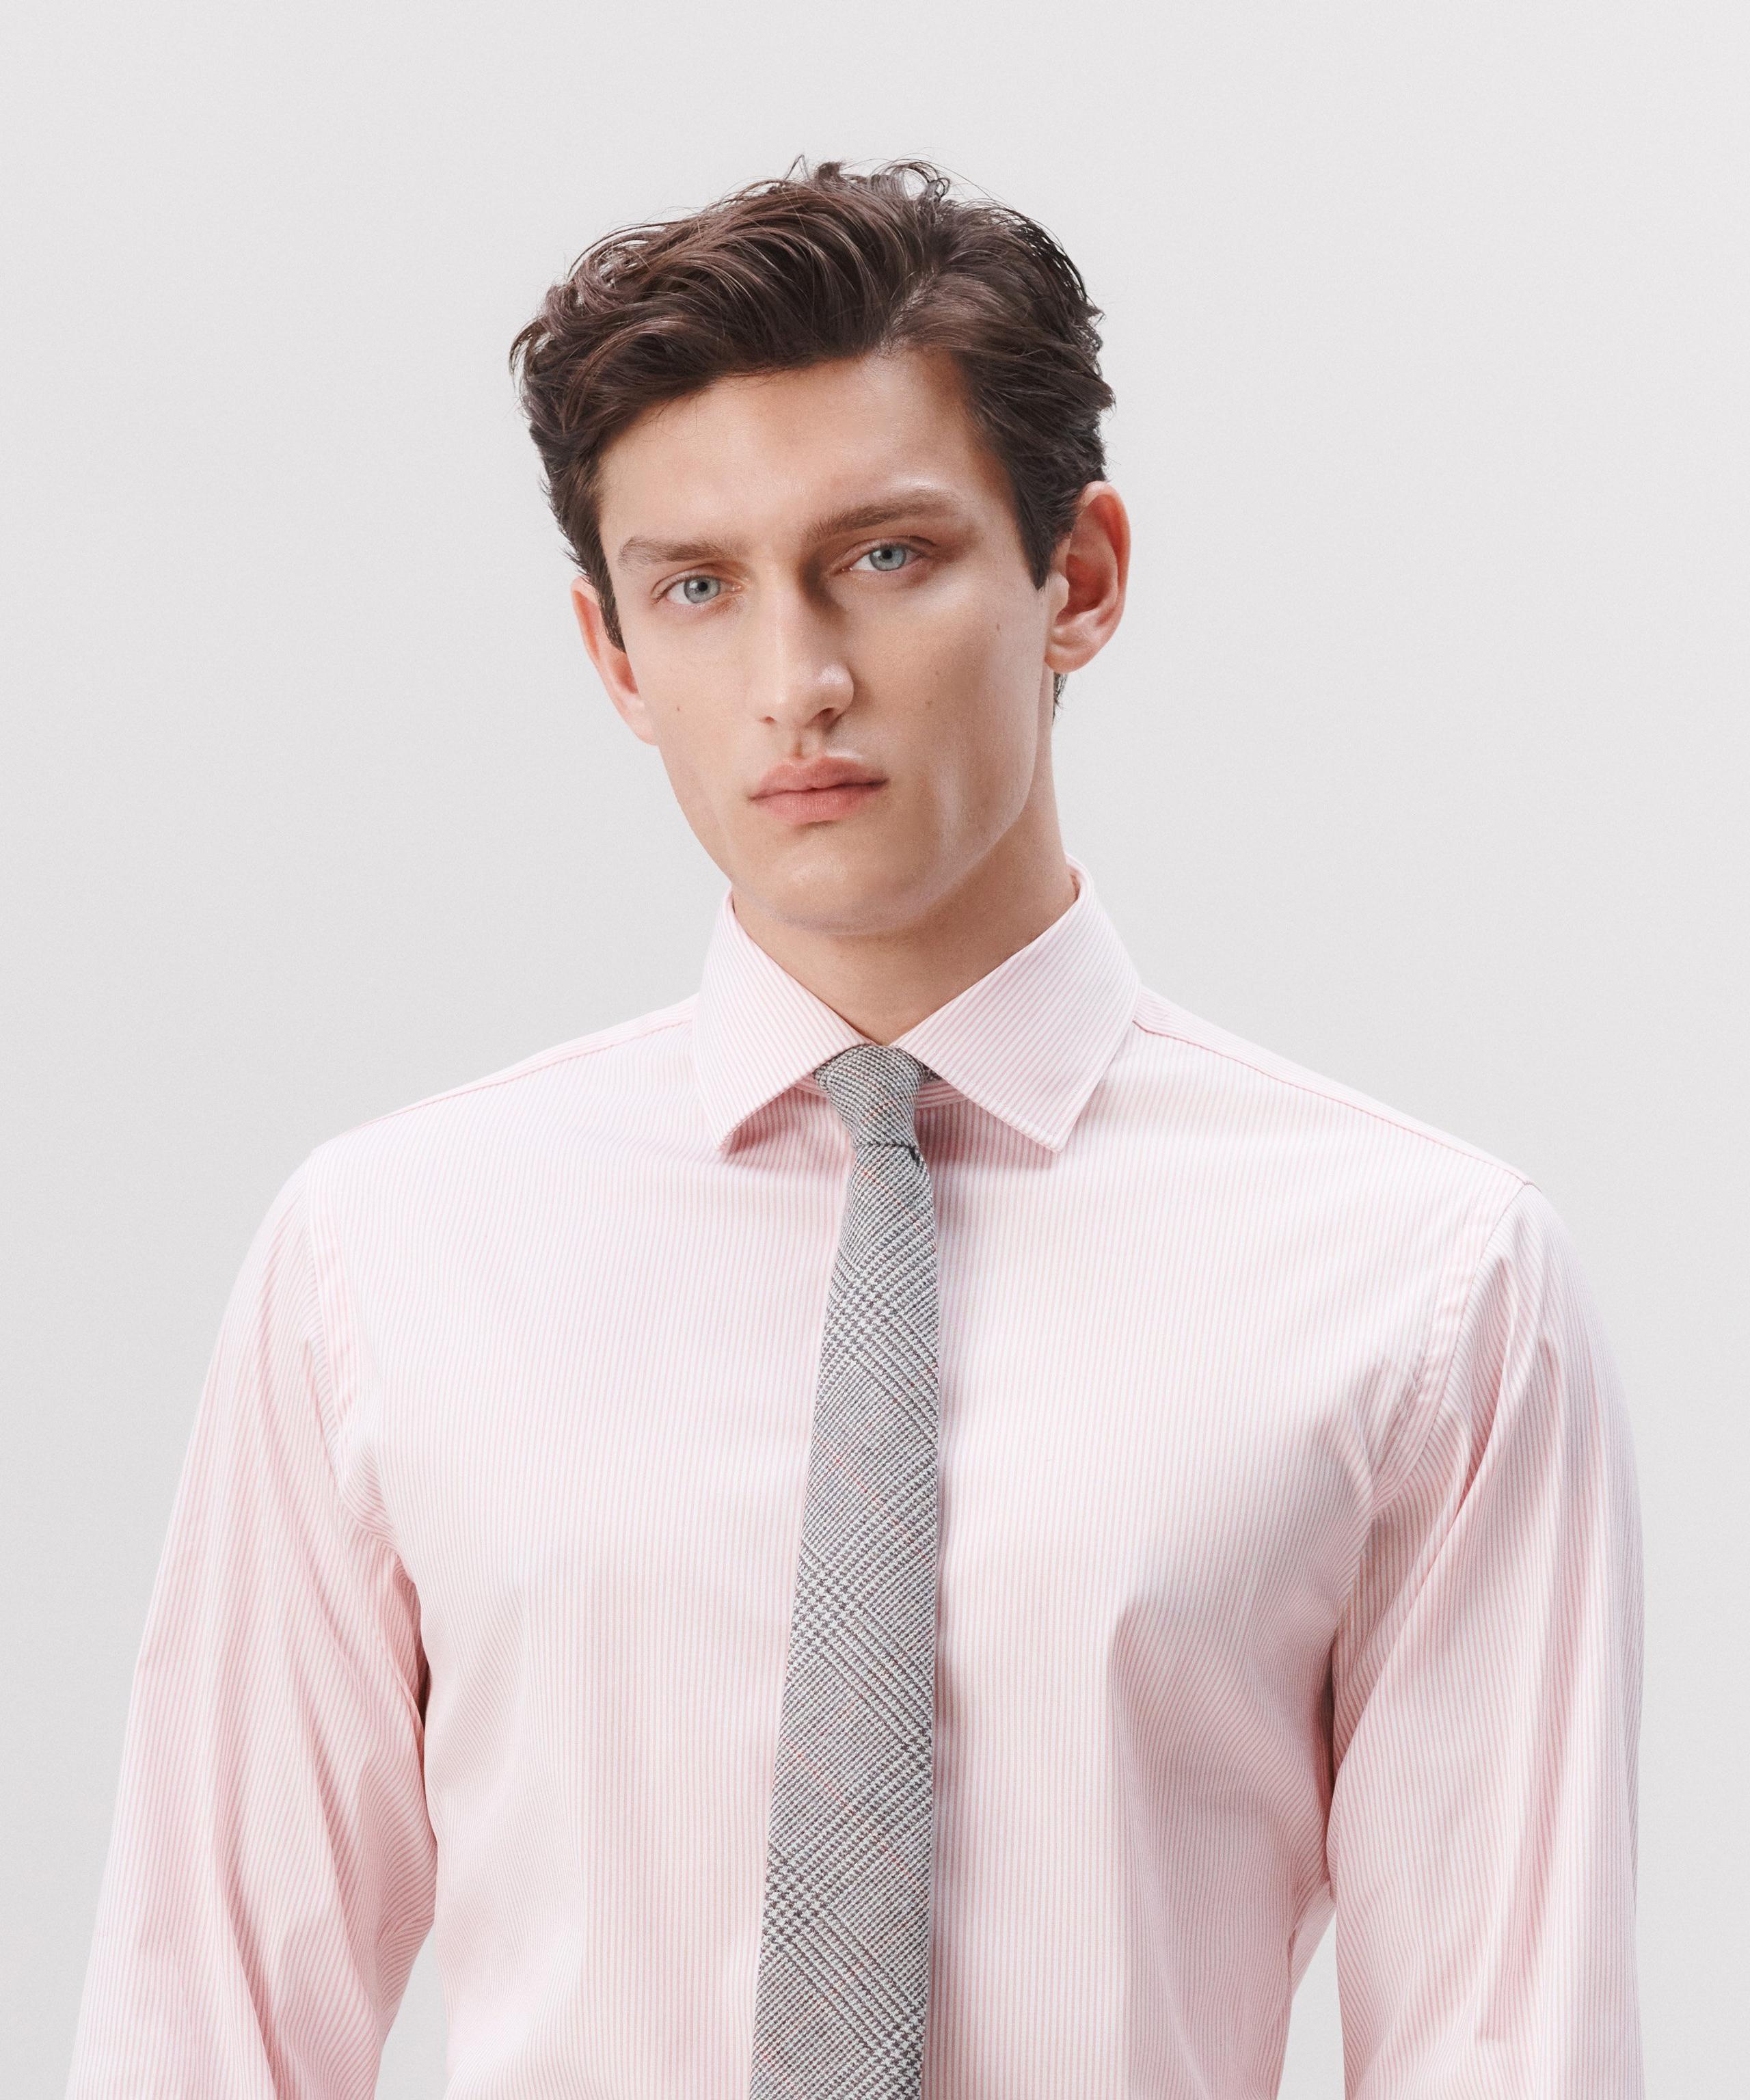 A man wearing a pink striped shirt with a grey tie